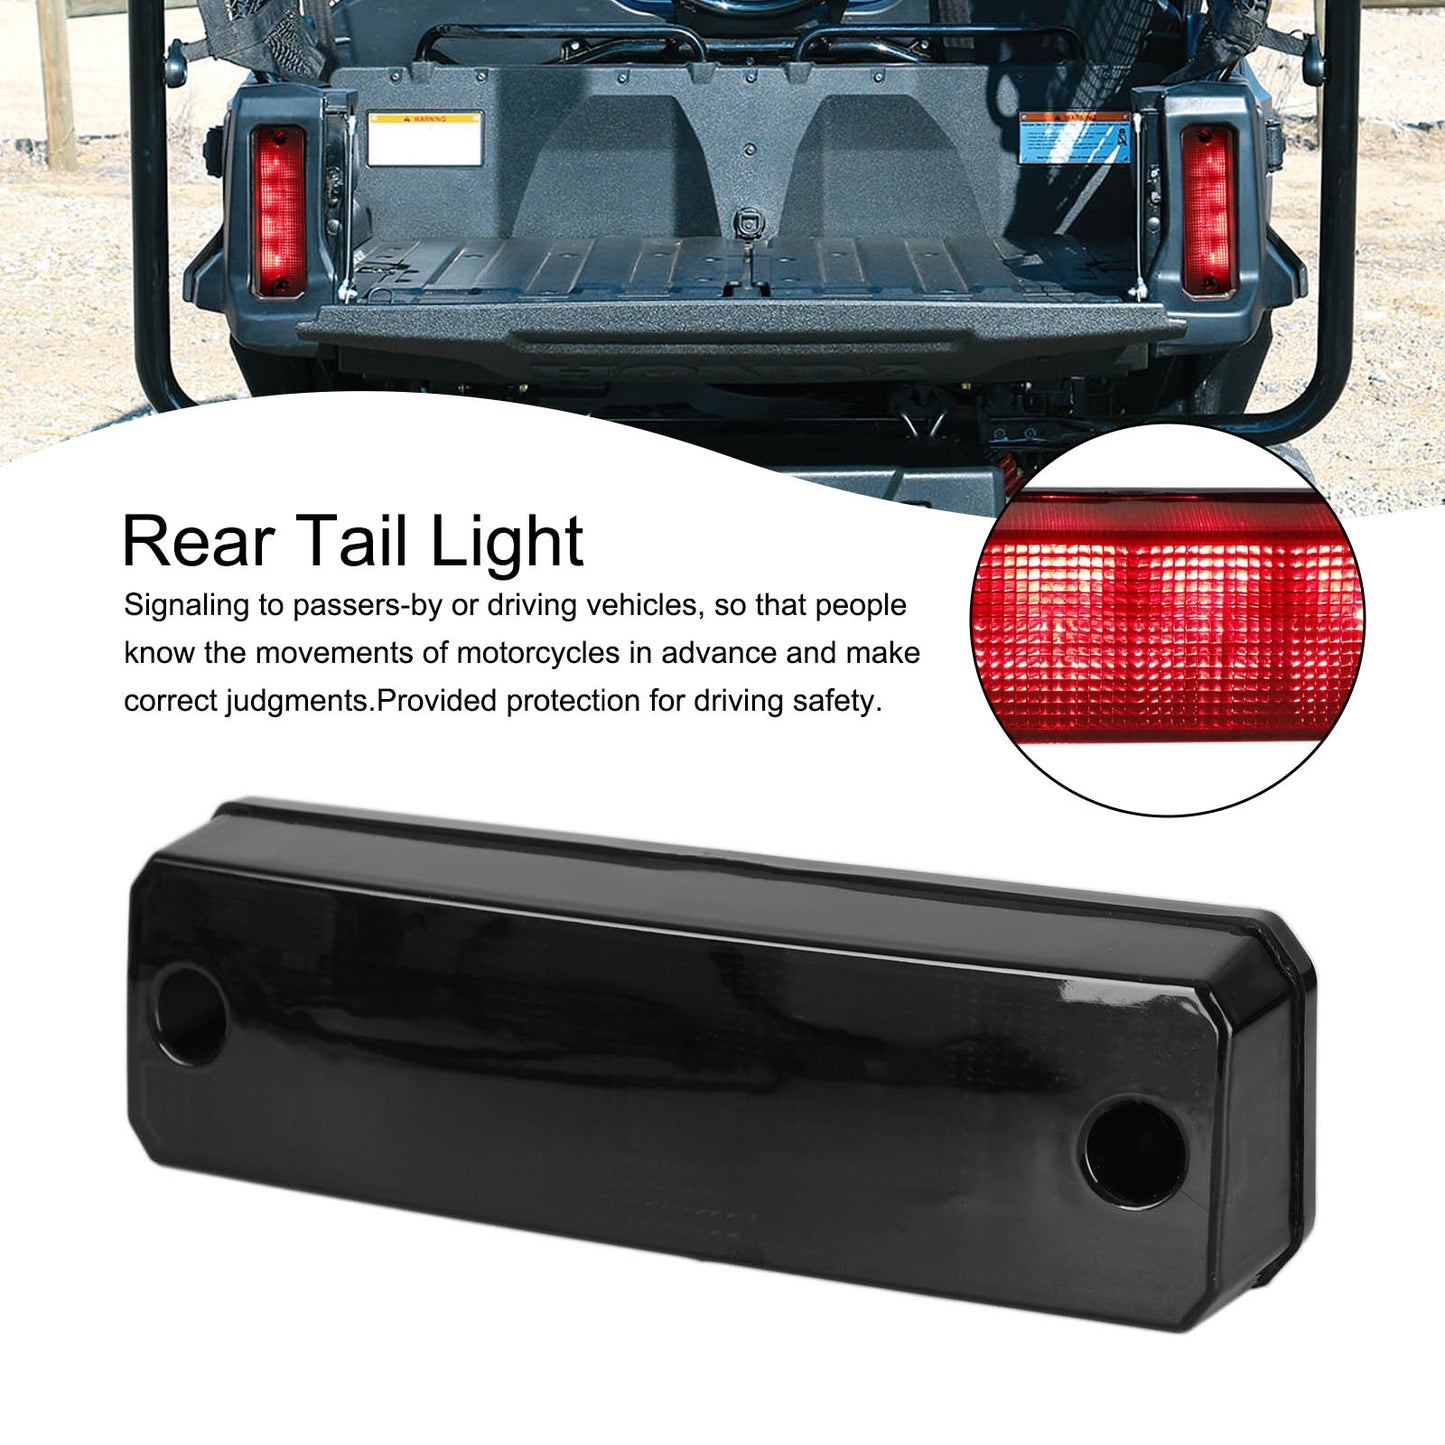 33700-HL3-A01 Rear Tail light Assembly For Honda Pioneer 520 700 1000 2014-2021